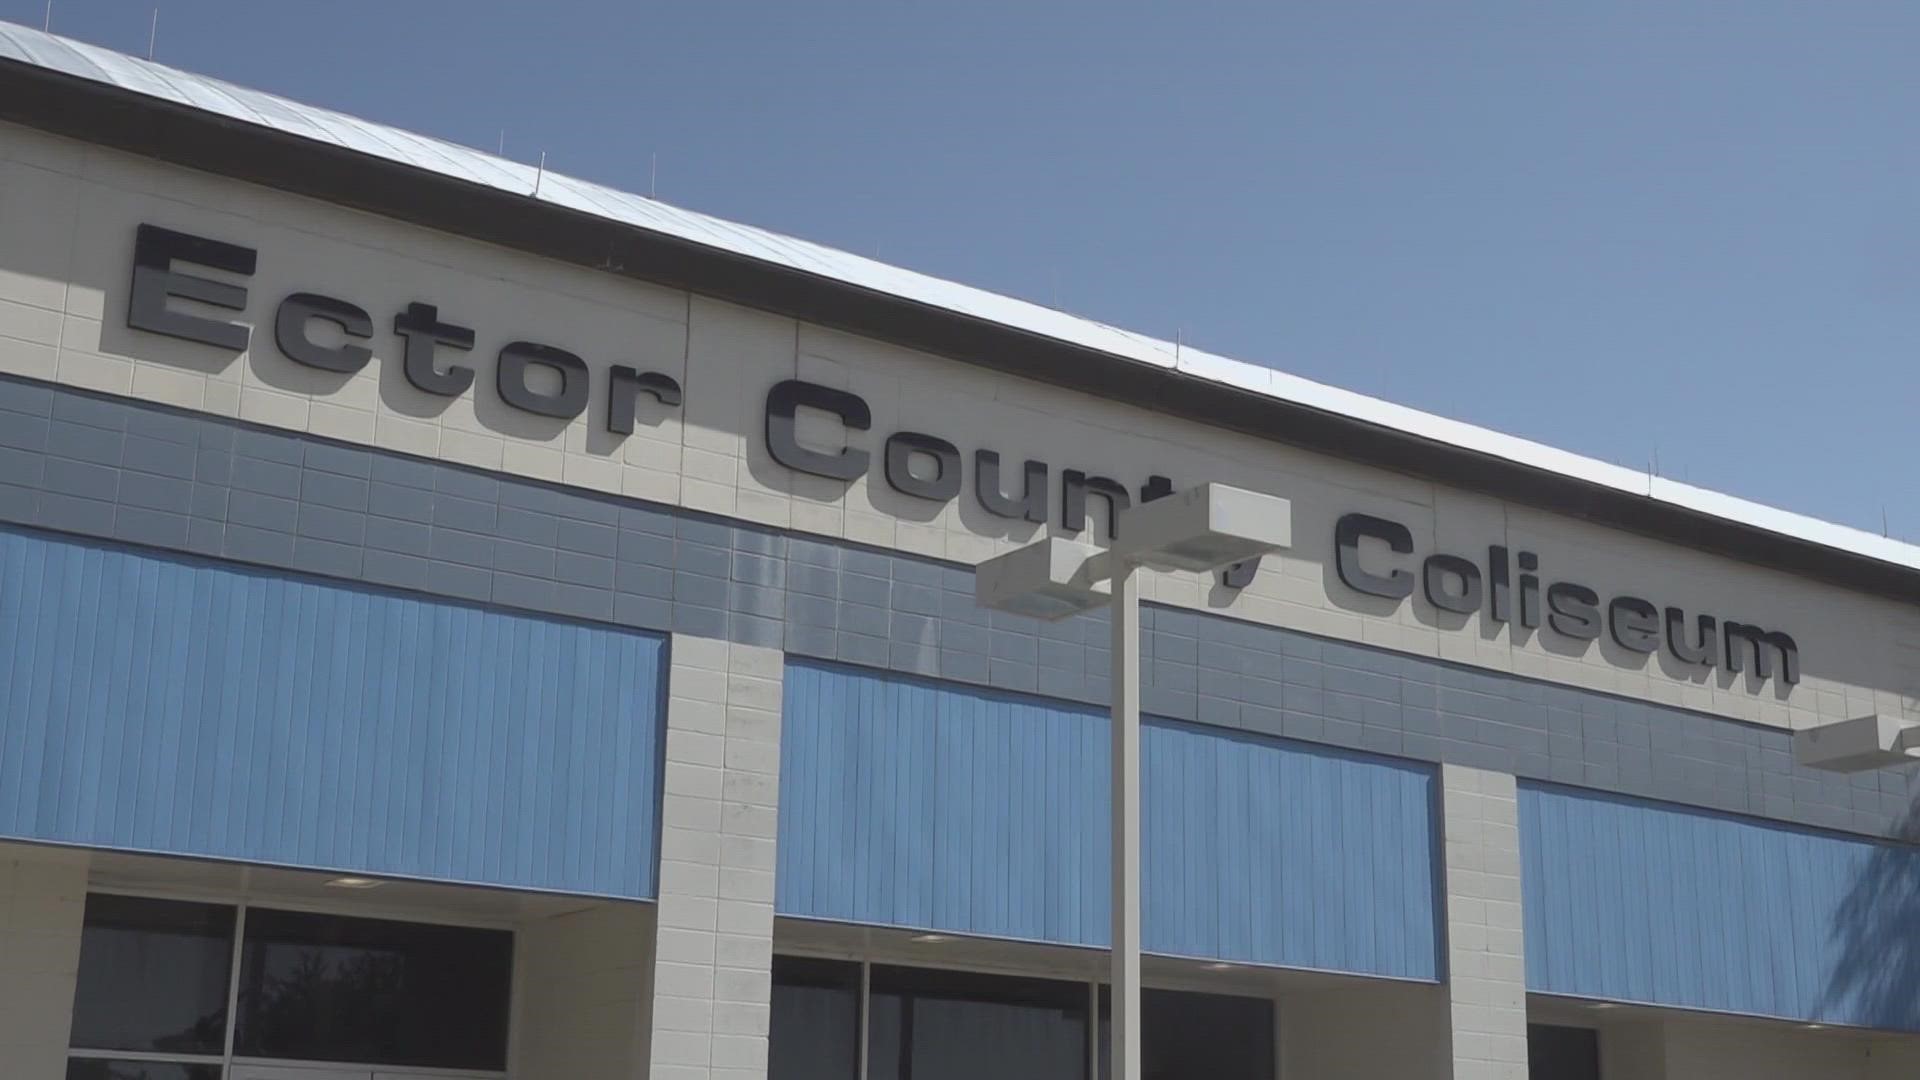 Commissioners are officially entertaining the idea of selling the Ector County Coliseum.